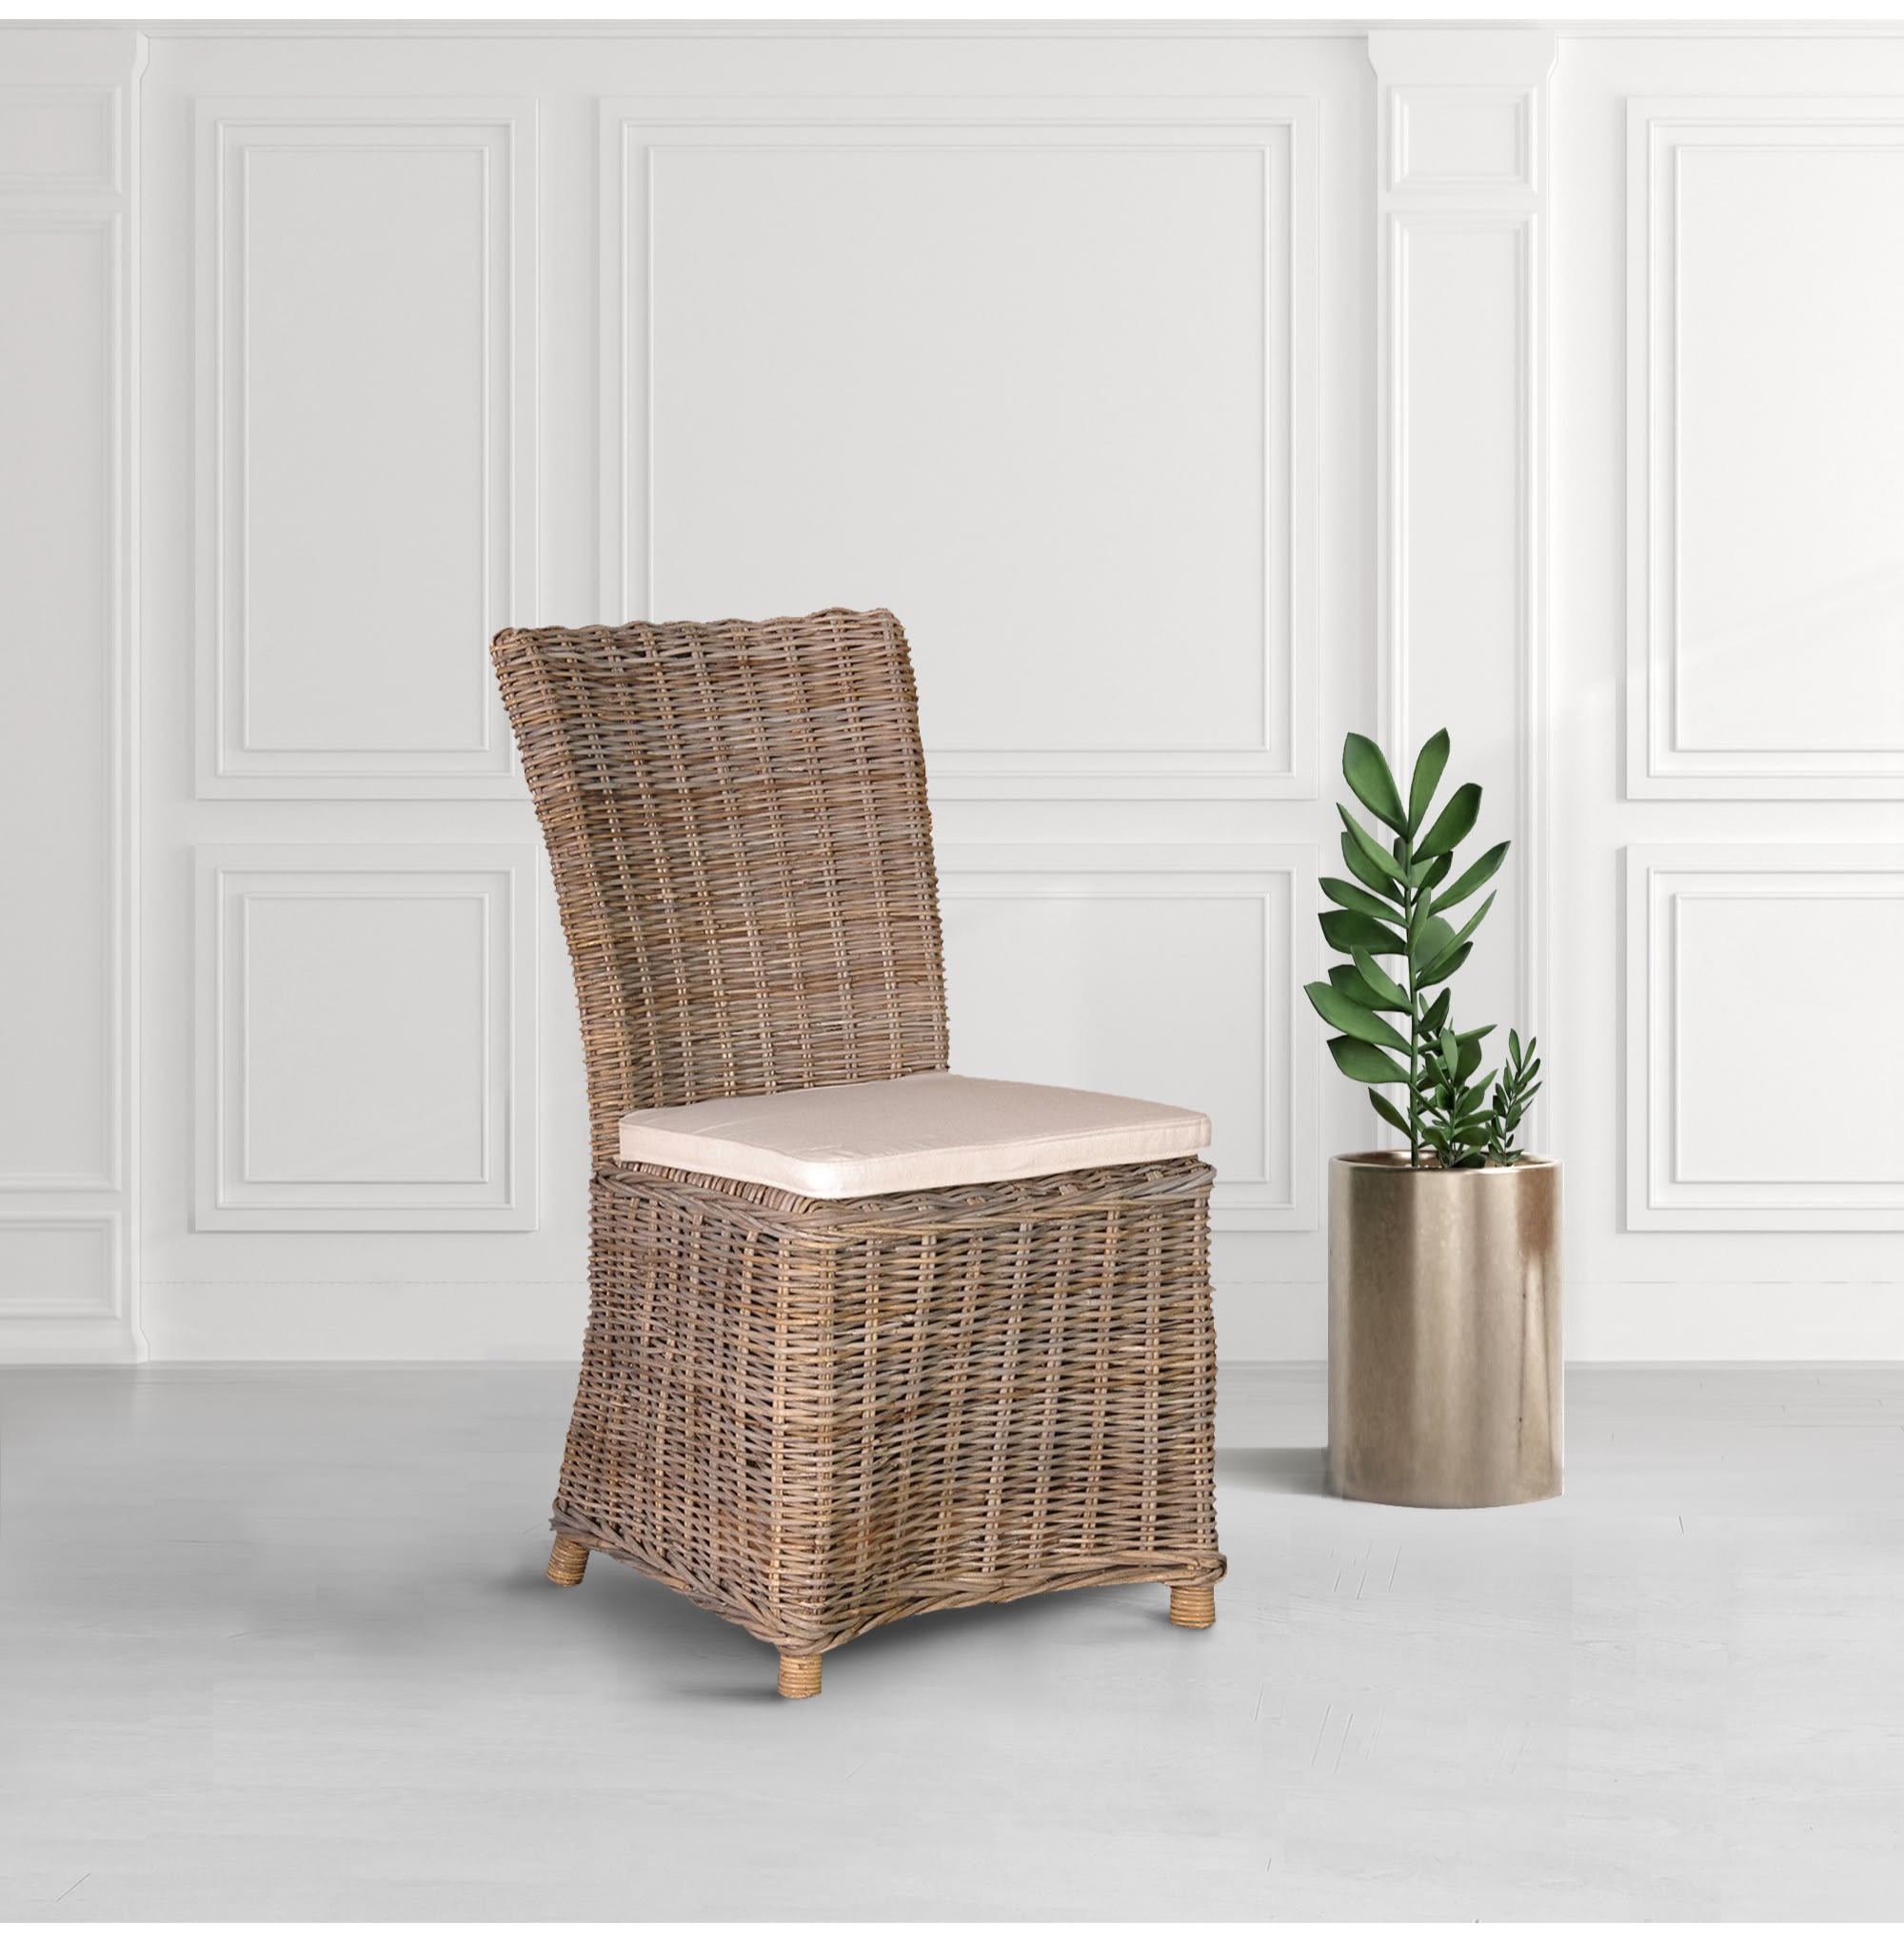 Woven Rattan Dining Chair with Linen Cushion